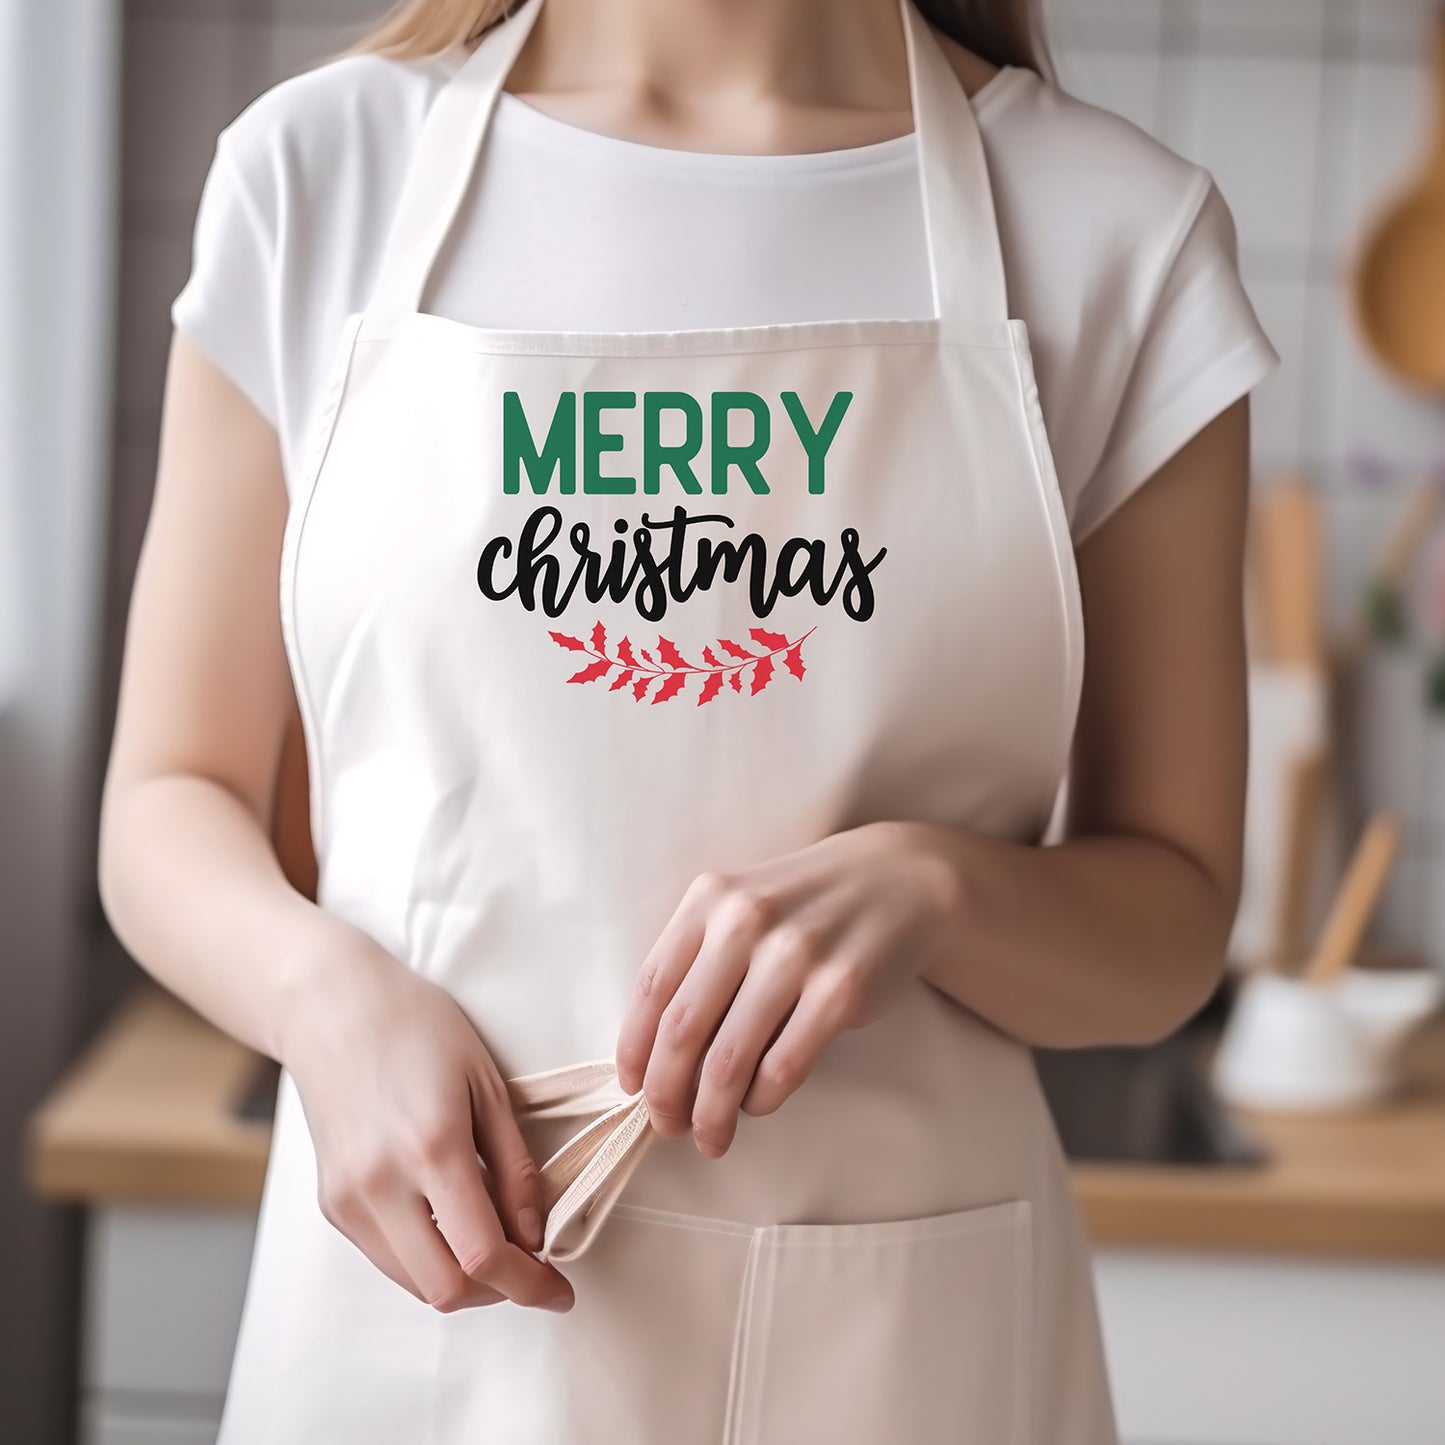 "Merry Christmas" With Holly Graphic